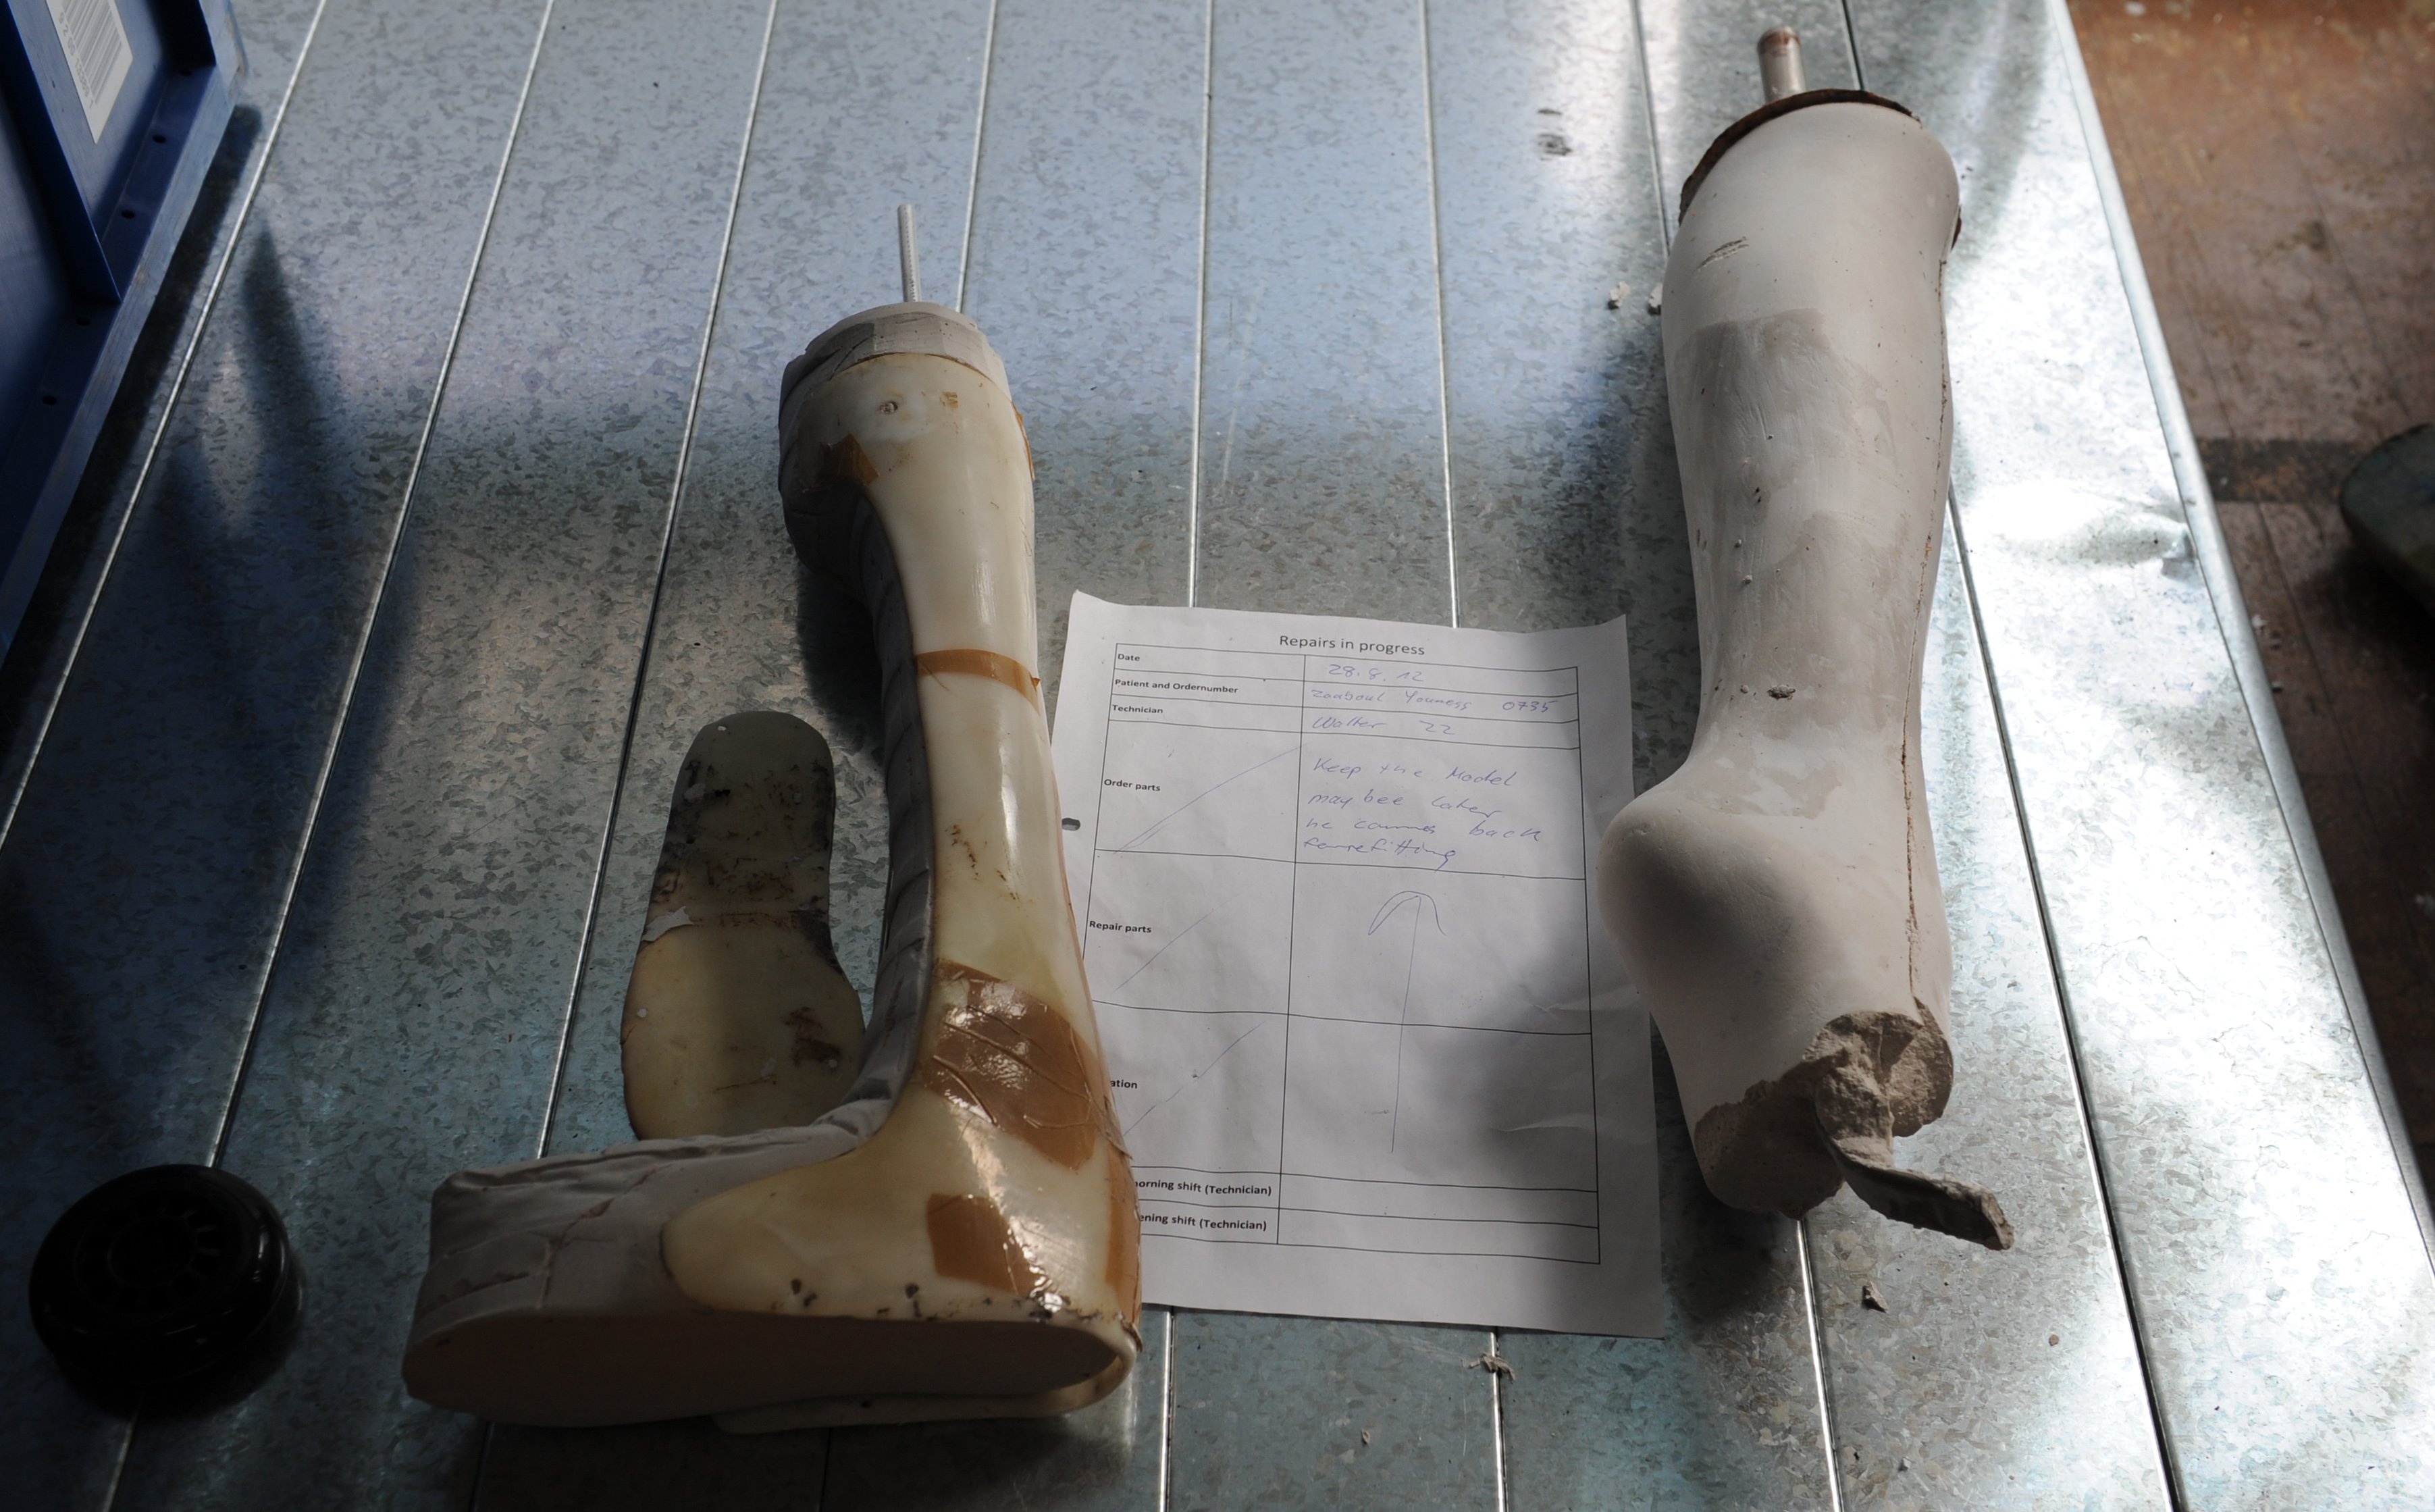 Repairs on athletes' prosthetic limbs are carried out in a workshop